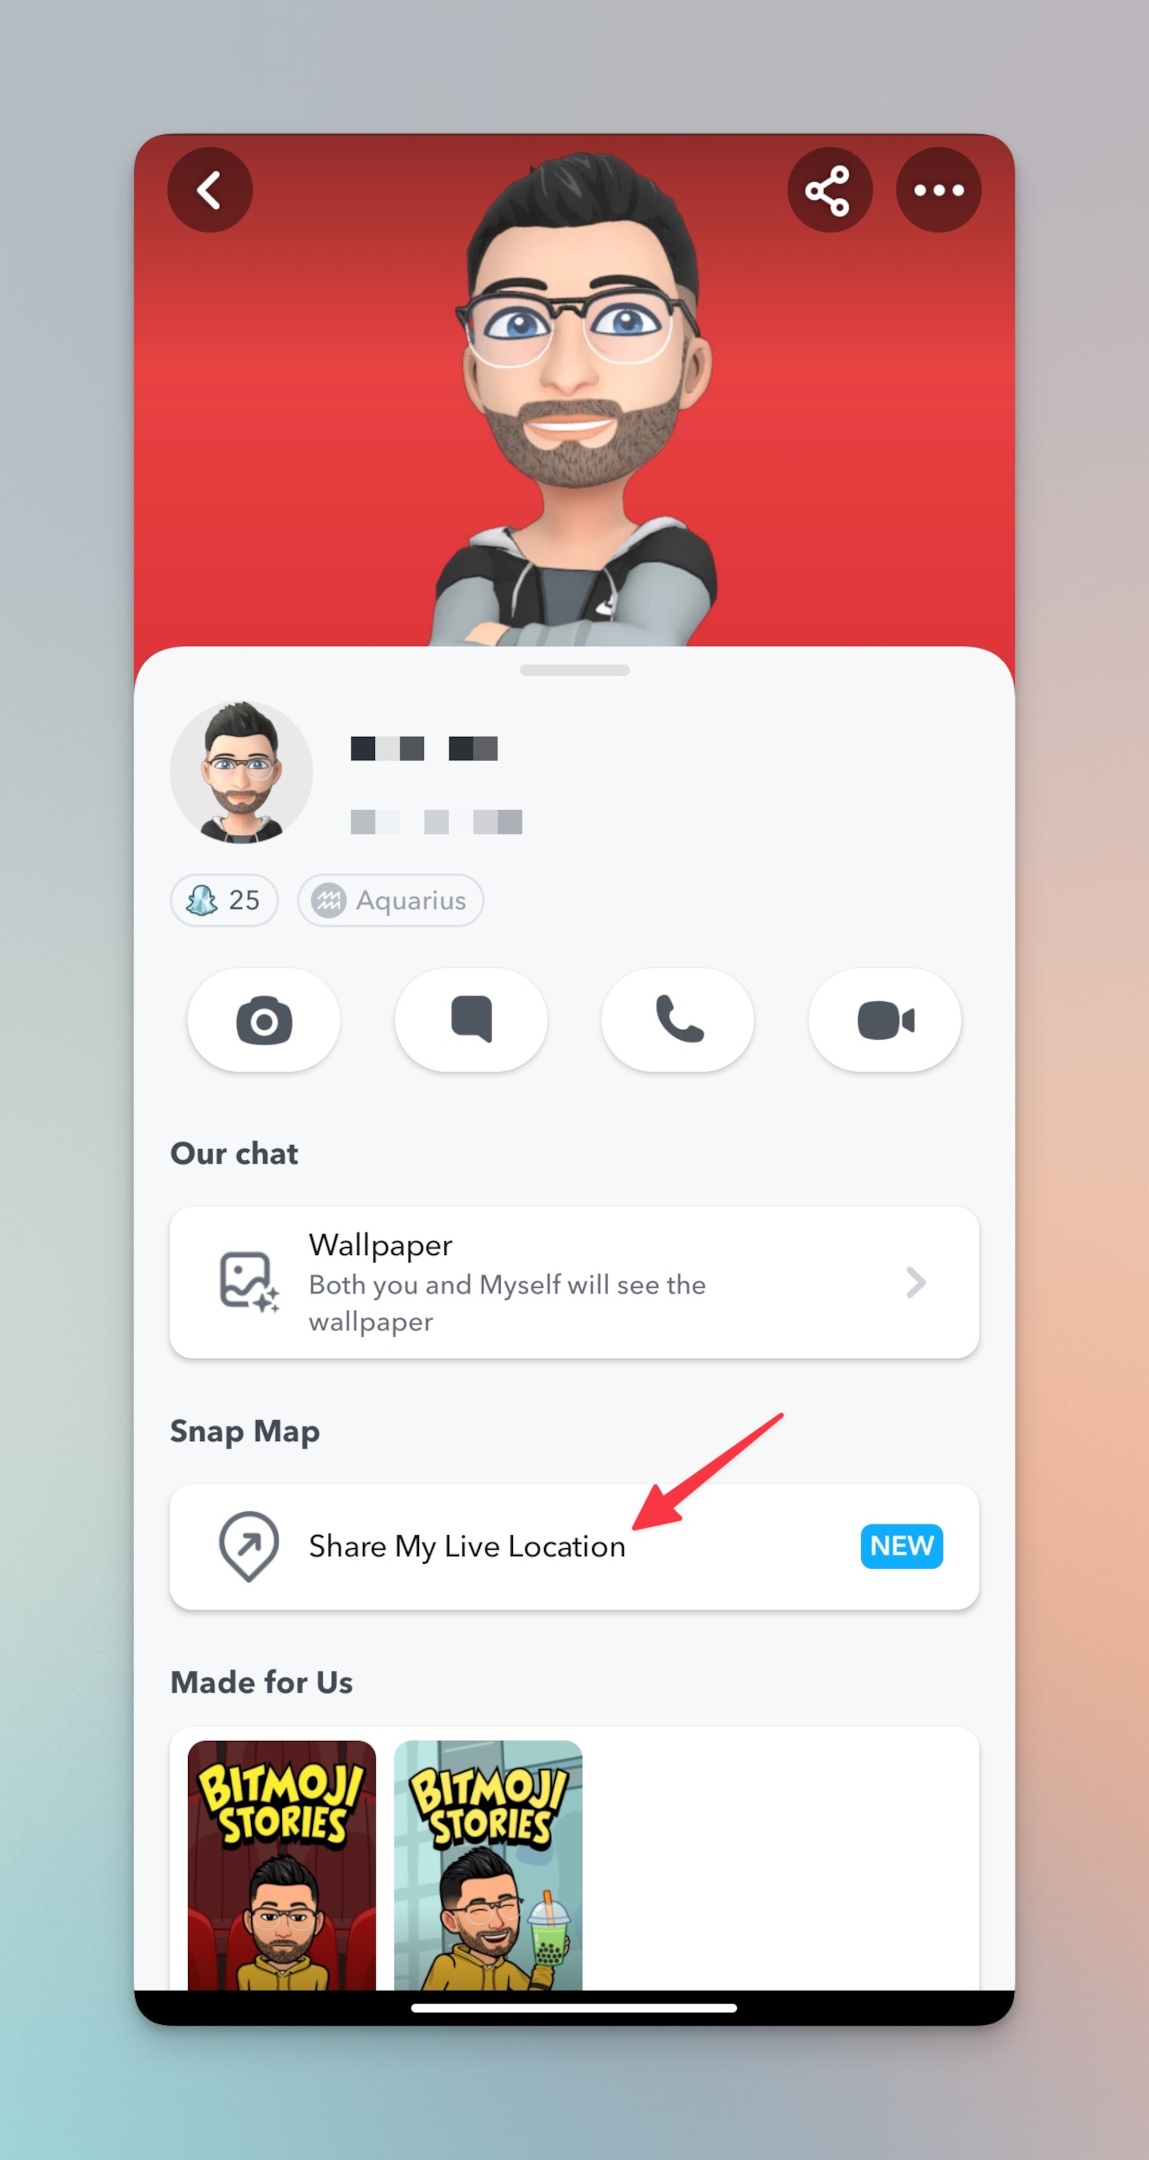 Remote.tools pointing to Share location menu on a profile of a user. This will notify users about this with utmost privacy. Keep in mind, you location will be shared based on the local time of your friends